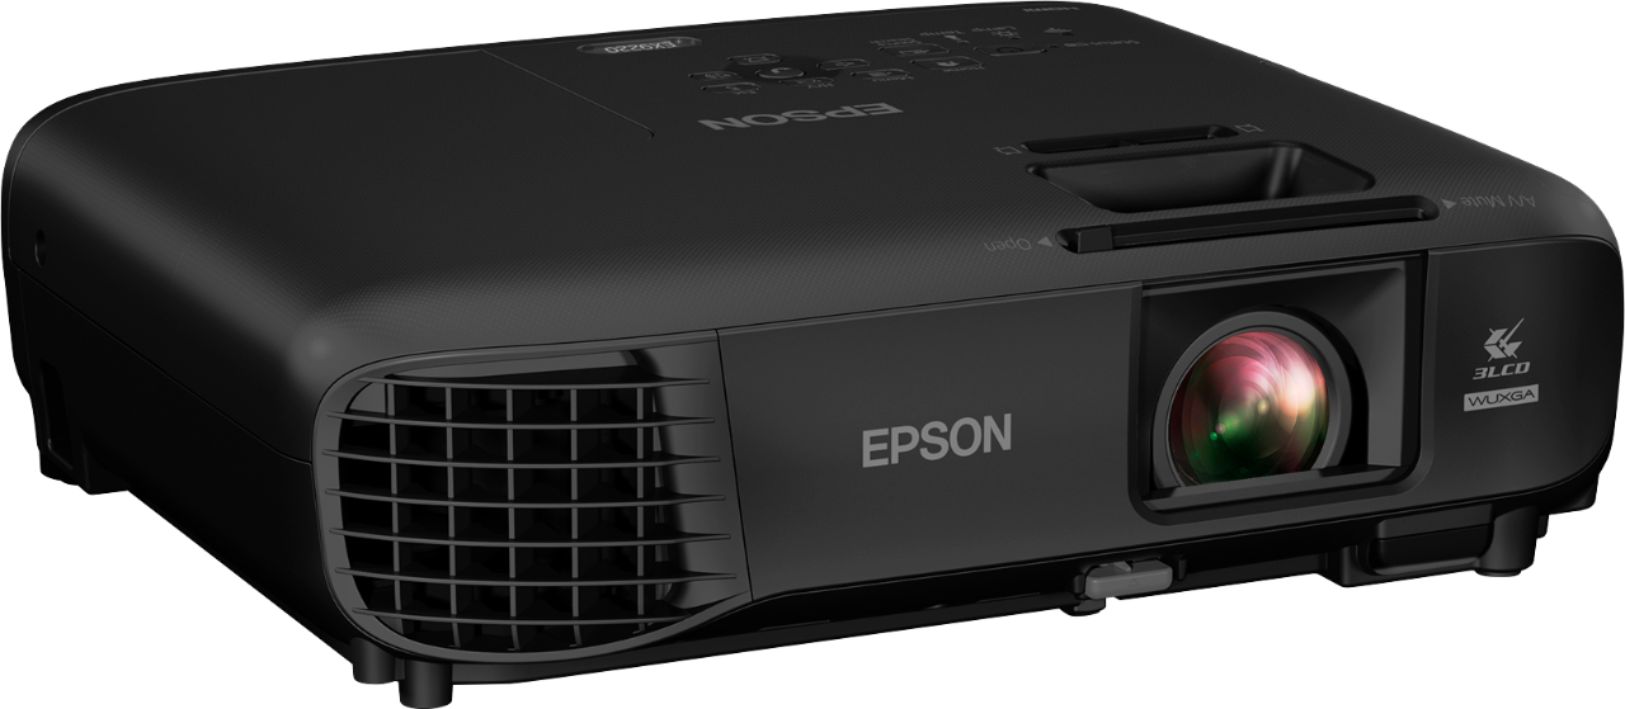 Angle View: Epson - Refurbished Pro EX9220 1080p Wireless 3LCD Projector - Black